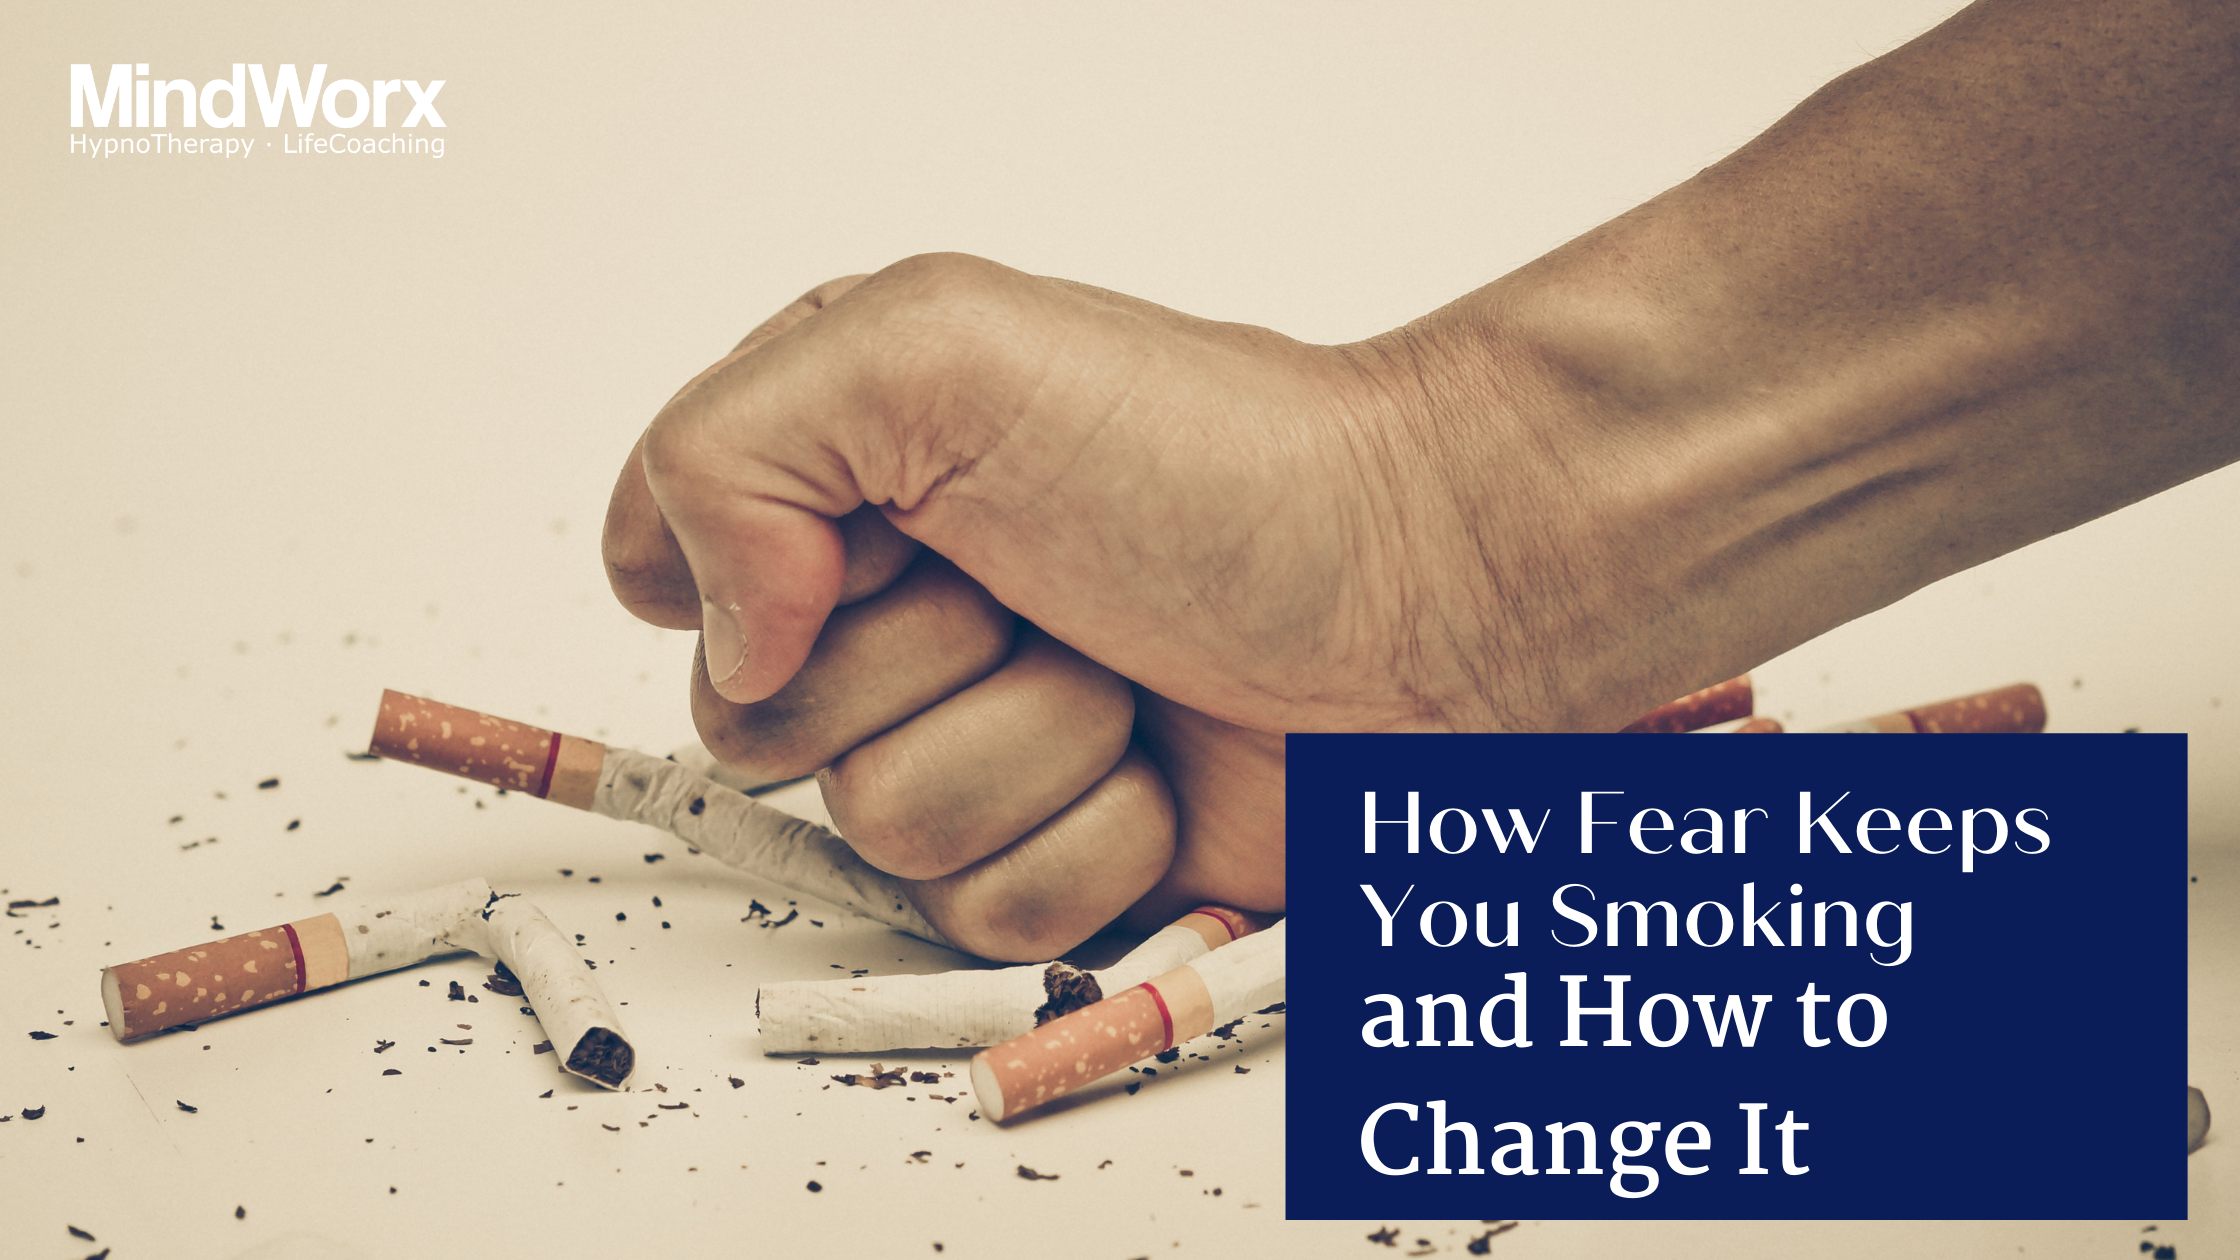 How Fear Keeps You Smoking and How to Change It